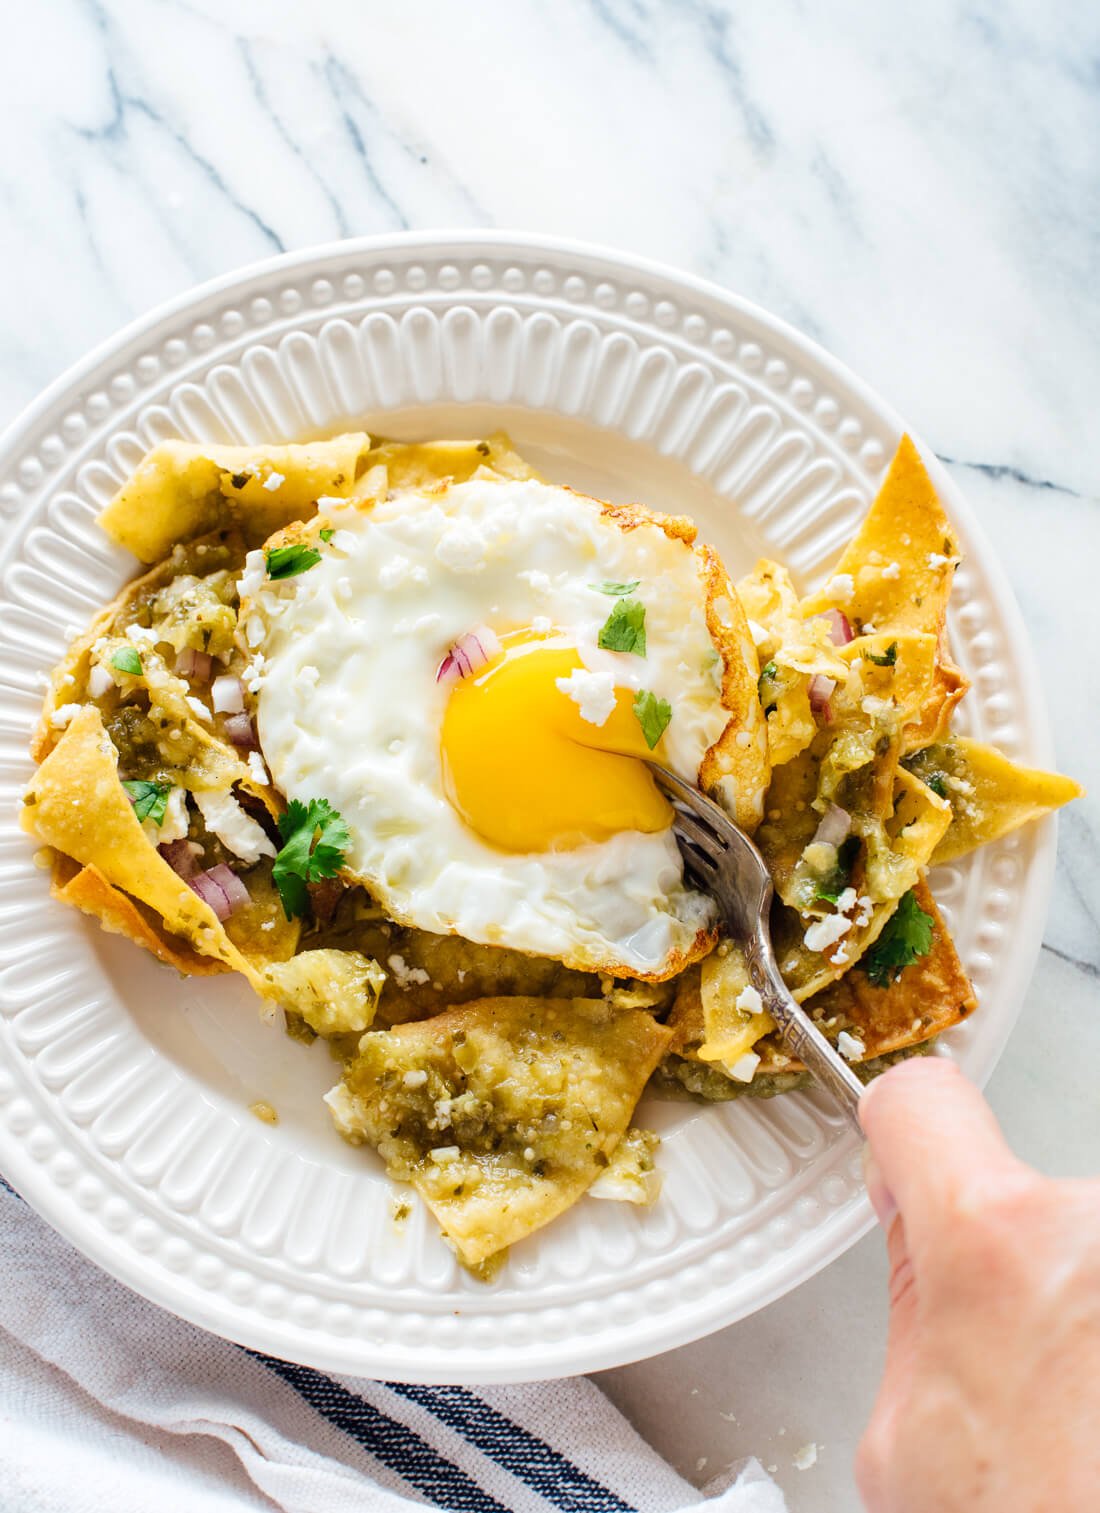 Incredibly delicious chilaquiles verdes with fried eggs, made from scratch! Get this vegetarian recipe at cookieandkate.com